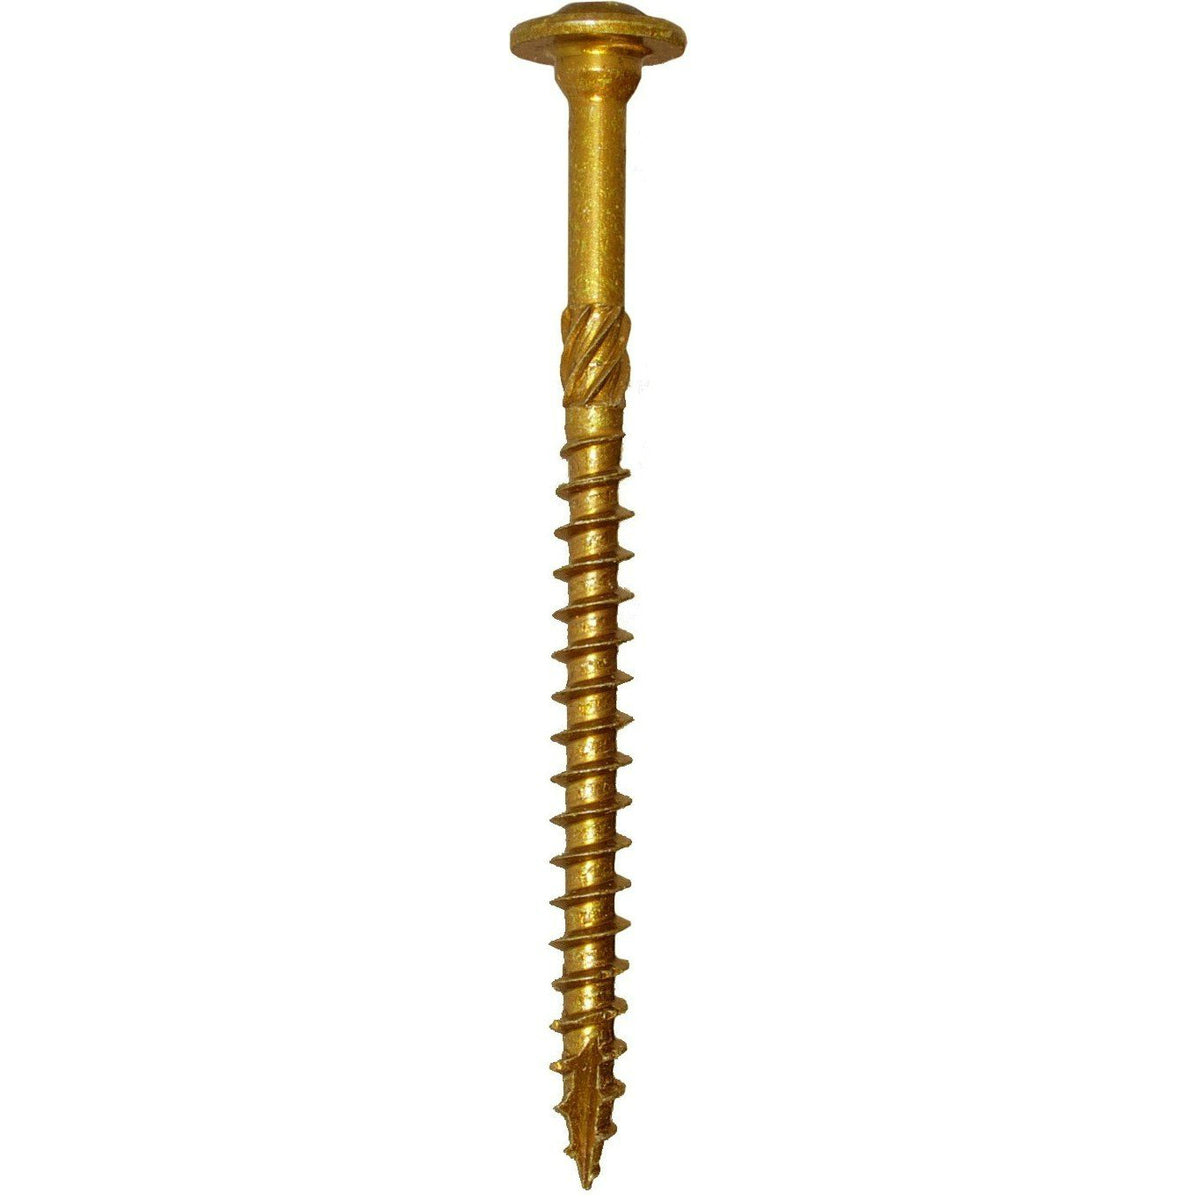 GRK 10281 RSS UberGrade Rugged Structural Screw, 3/8" x 6", 300-Count